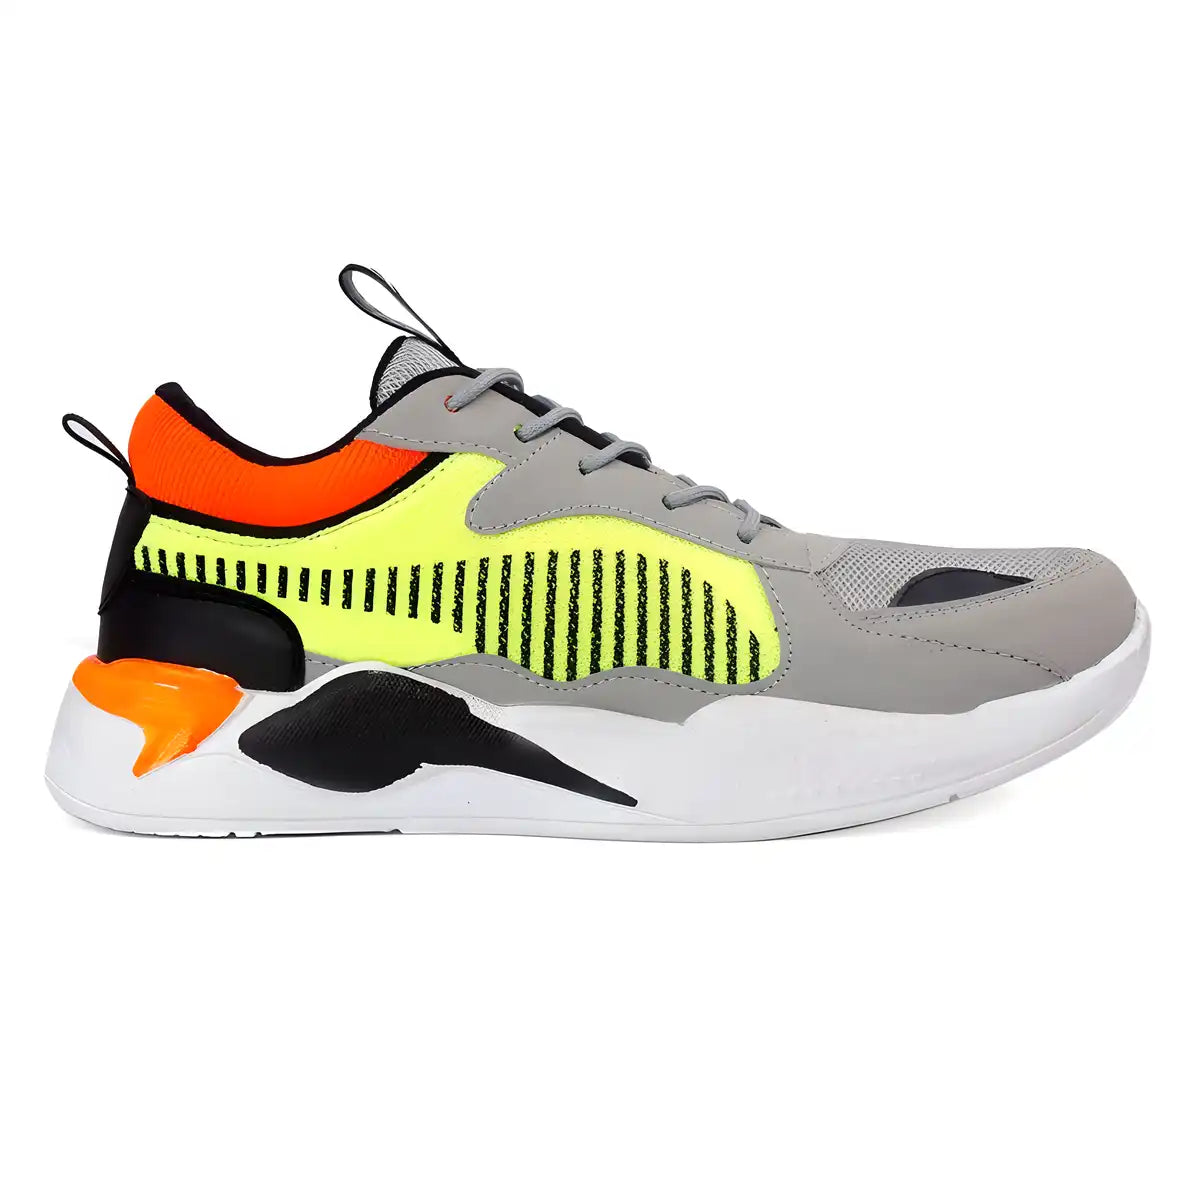 Shoe Island Casual Daily Wear Lace Ups Sports Running Shoes For Men